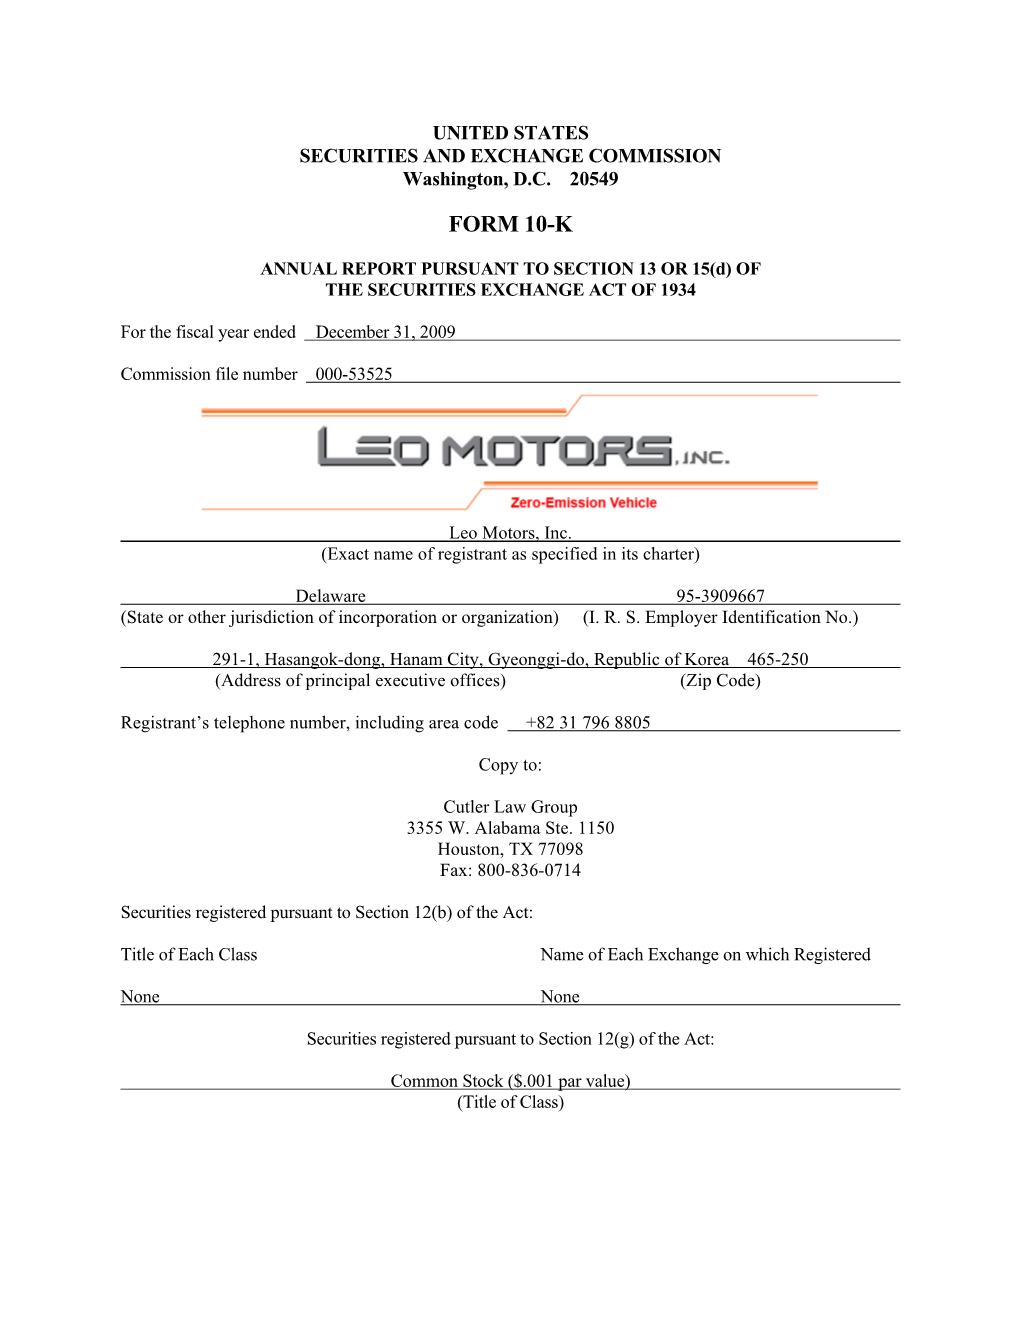 Leo Motors, Inc. (Exact Name of Registrant As Specified in Its Charter)